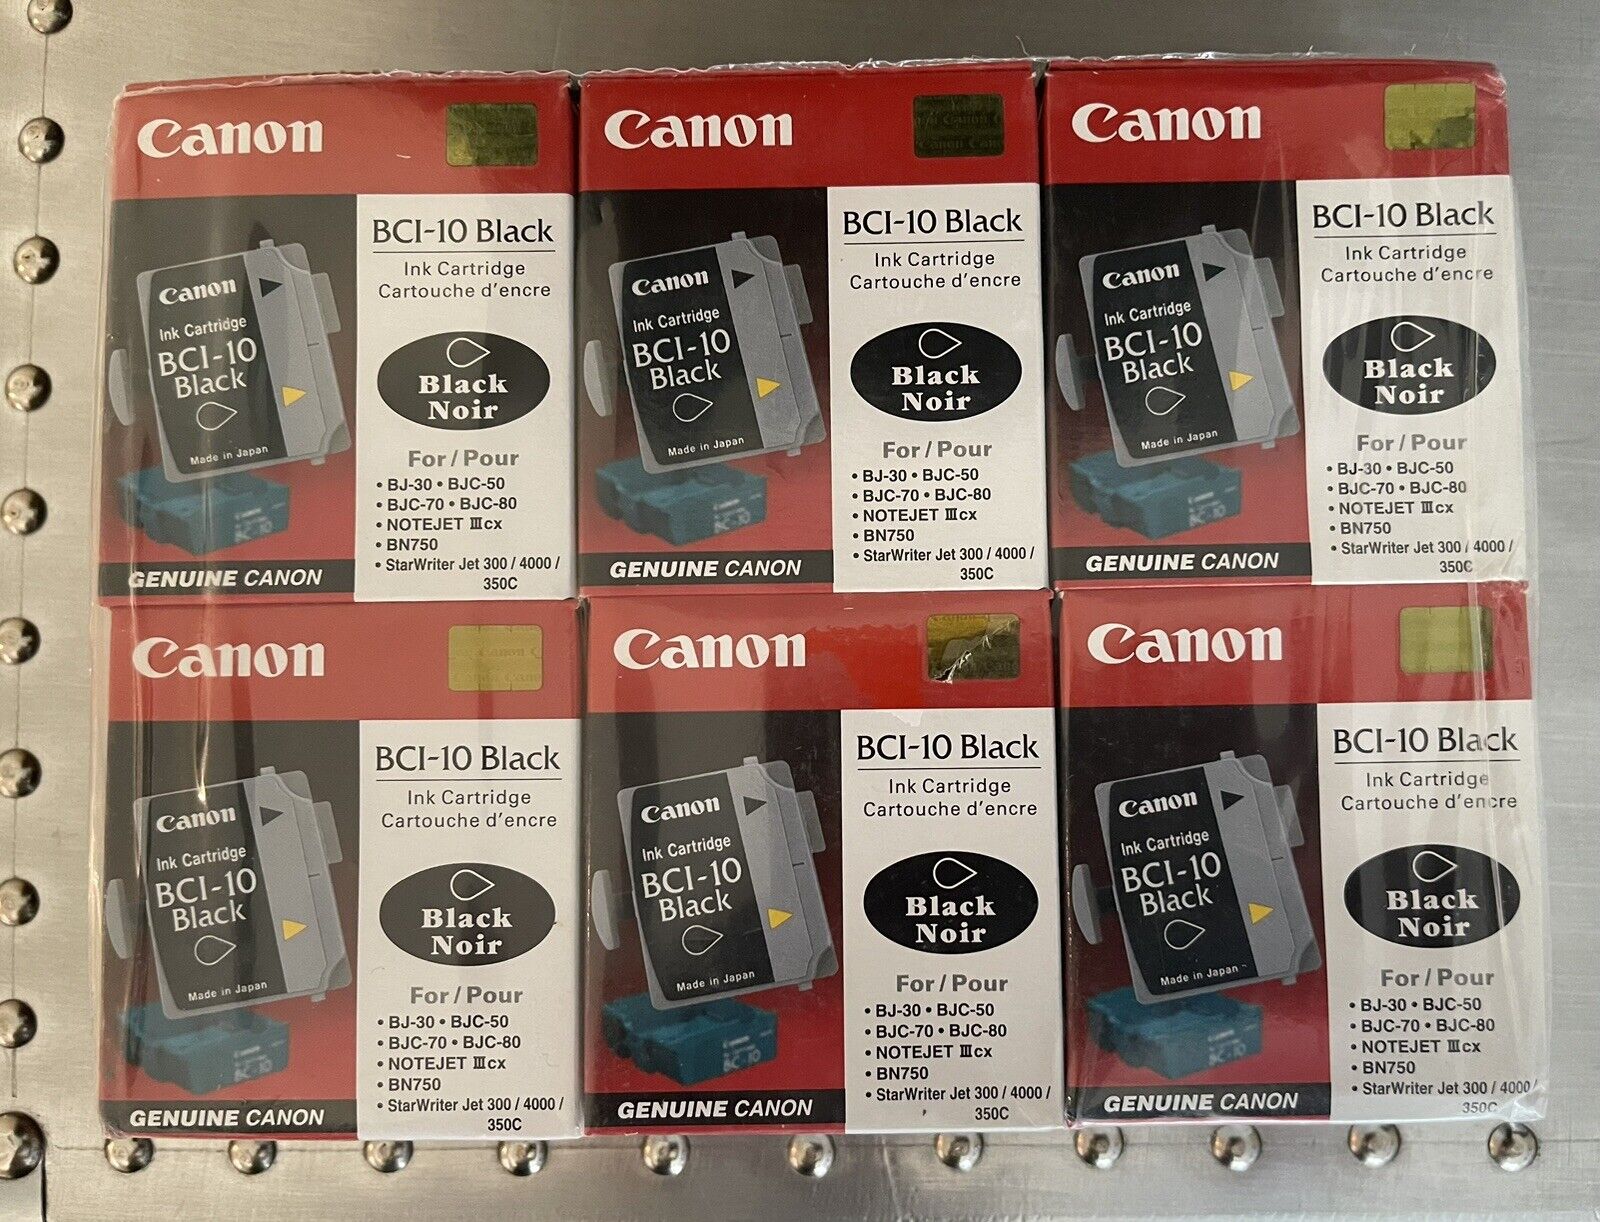 6 Sealed Boxes Of Genuine Canon BCI-10 Black Ink Cartridges  18 Total